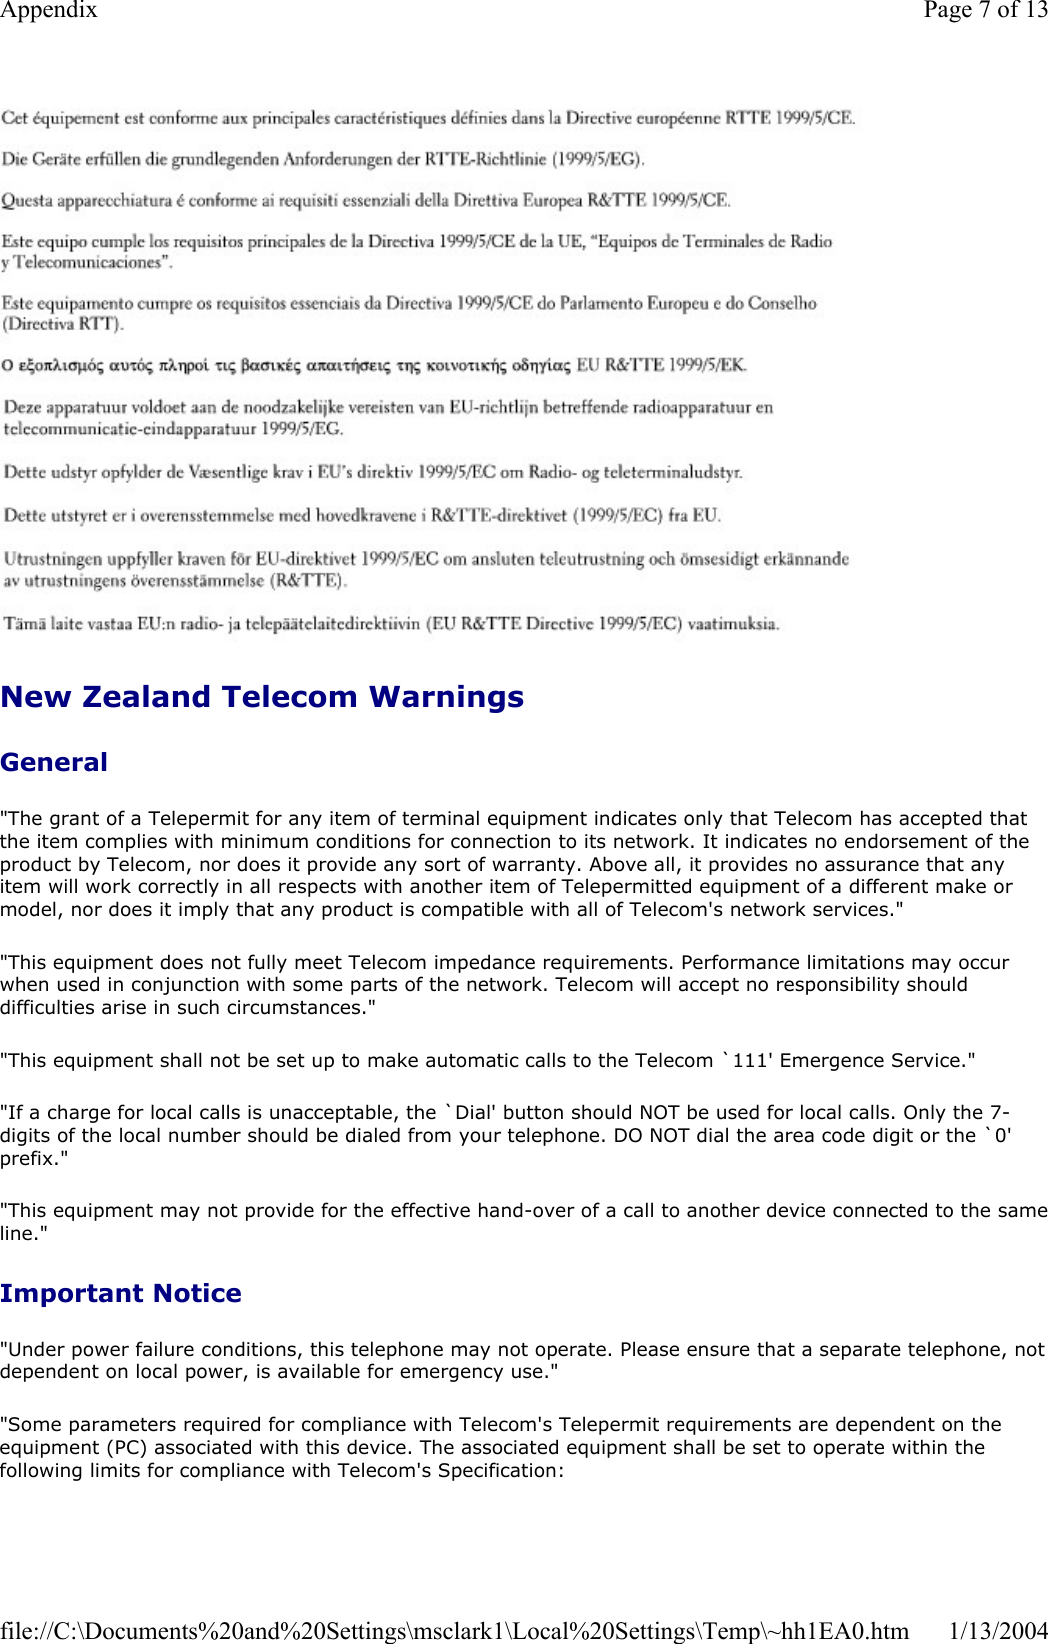 New Zealand Telecom Warnings General&quot;The grant of a Telepermit for any item of terminal equipment indicates only that Telecom has accepted that the item complies with minimum conditions for connection to its network. It indicates no endorsement of the product by Telecom, nor does it provide any sort of warranty. Above all, it provides no assurance that any item will work correctly in all respects with another item of Telepermitted equipment of a different make or model, nor does it imply that any product is compatible with all of Telecom&apos;s network services.&quot; &quot;This equipment does not fully meet Telecom impedance requirements. Performance limitations may occur when used in conjunction with some parts of the network. Telecom will accept no responsibility should difficulties arise in such circumstances.&quot; &quot;This equipment shall not be set up to make automatic calls to the Telecom `111&apos; Emergence Service.&quot; &quot;If a charge for local calls is unacceptable, the `Dial&apos; button should NOT be used for local calls. Only the 7-digits of the local number should be dialed from your telephone. DO NOT dial the area code digit or the `0&apos; prefix.&quot; &quot;This equipment may not provide for the effective hand-over of a call to another device connected to the sameline.&quot;Important Notice &quot;Under power failure conditions, this telephone may not operate. Please ensure that a separate telephone, not dependent on local power, is available for emergency use.&quot; &quot;Some parameters required for compliance with Telecom&apos;s Telepermit requirements are dependent on the equipment (PC) associated with this device. The associated equipment shall be set to operate within the following limits for compliance with Telecom&apos;s Specification: Page 7 of 13Appendix1/13/2004file://C:\Documents%20and%20Settings\msclark1\Local%20Settings\Temp\~hh1EA0.htm